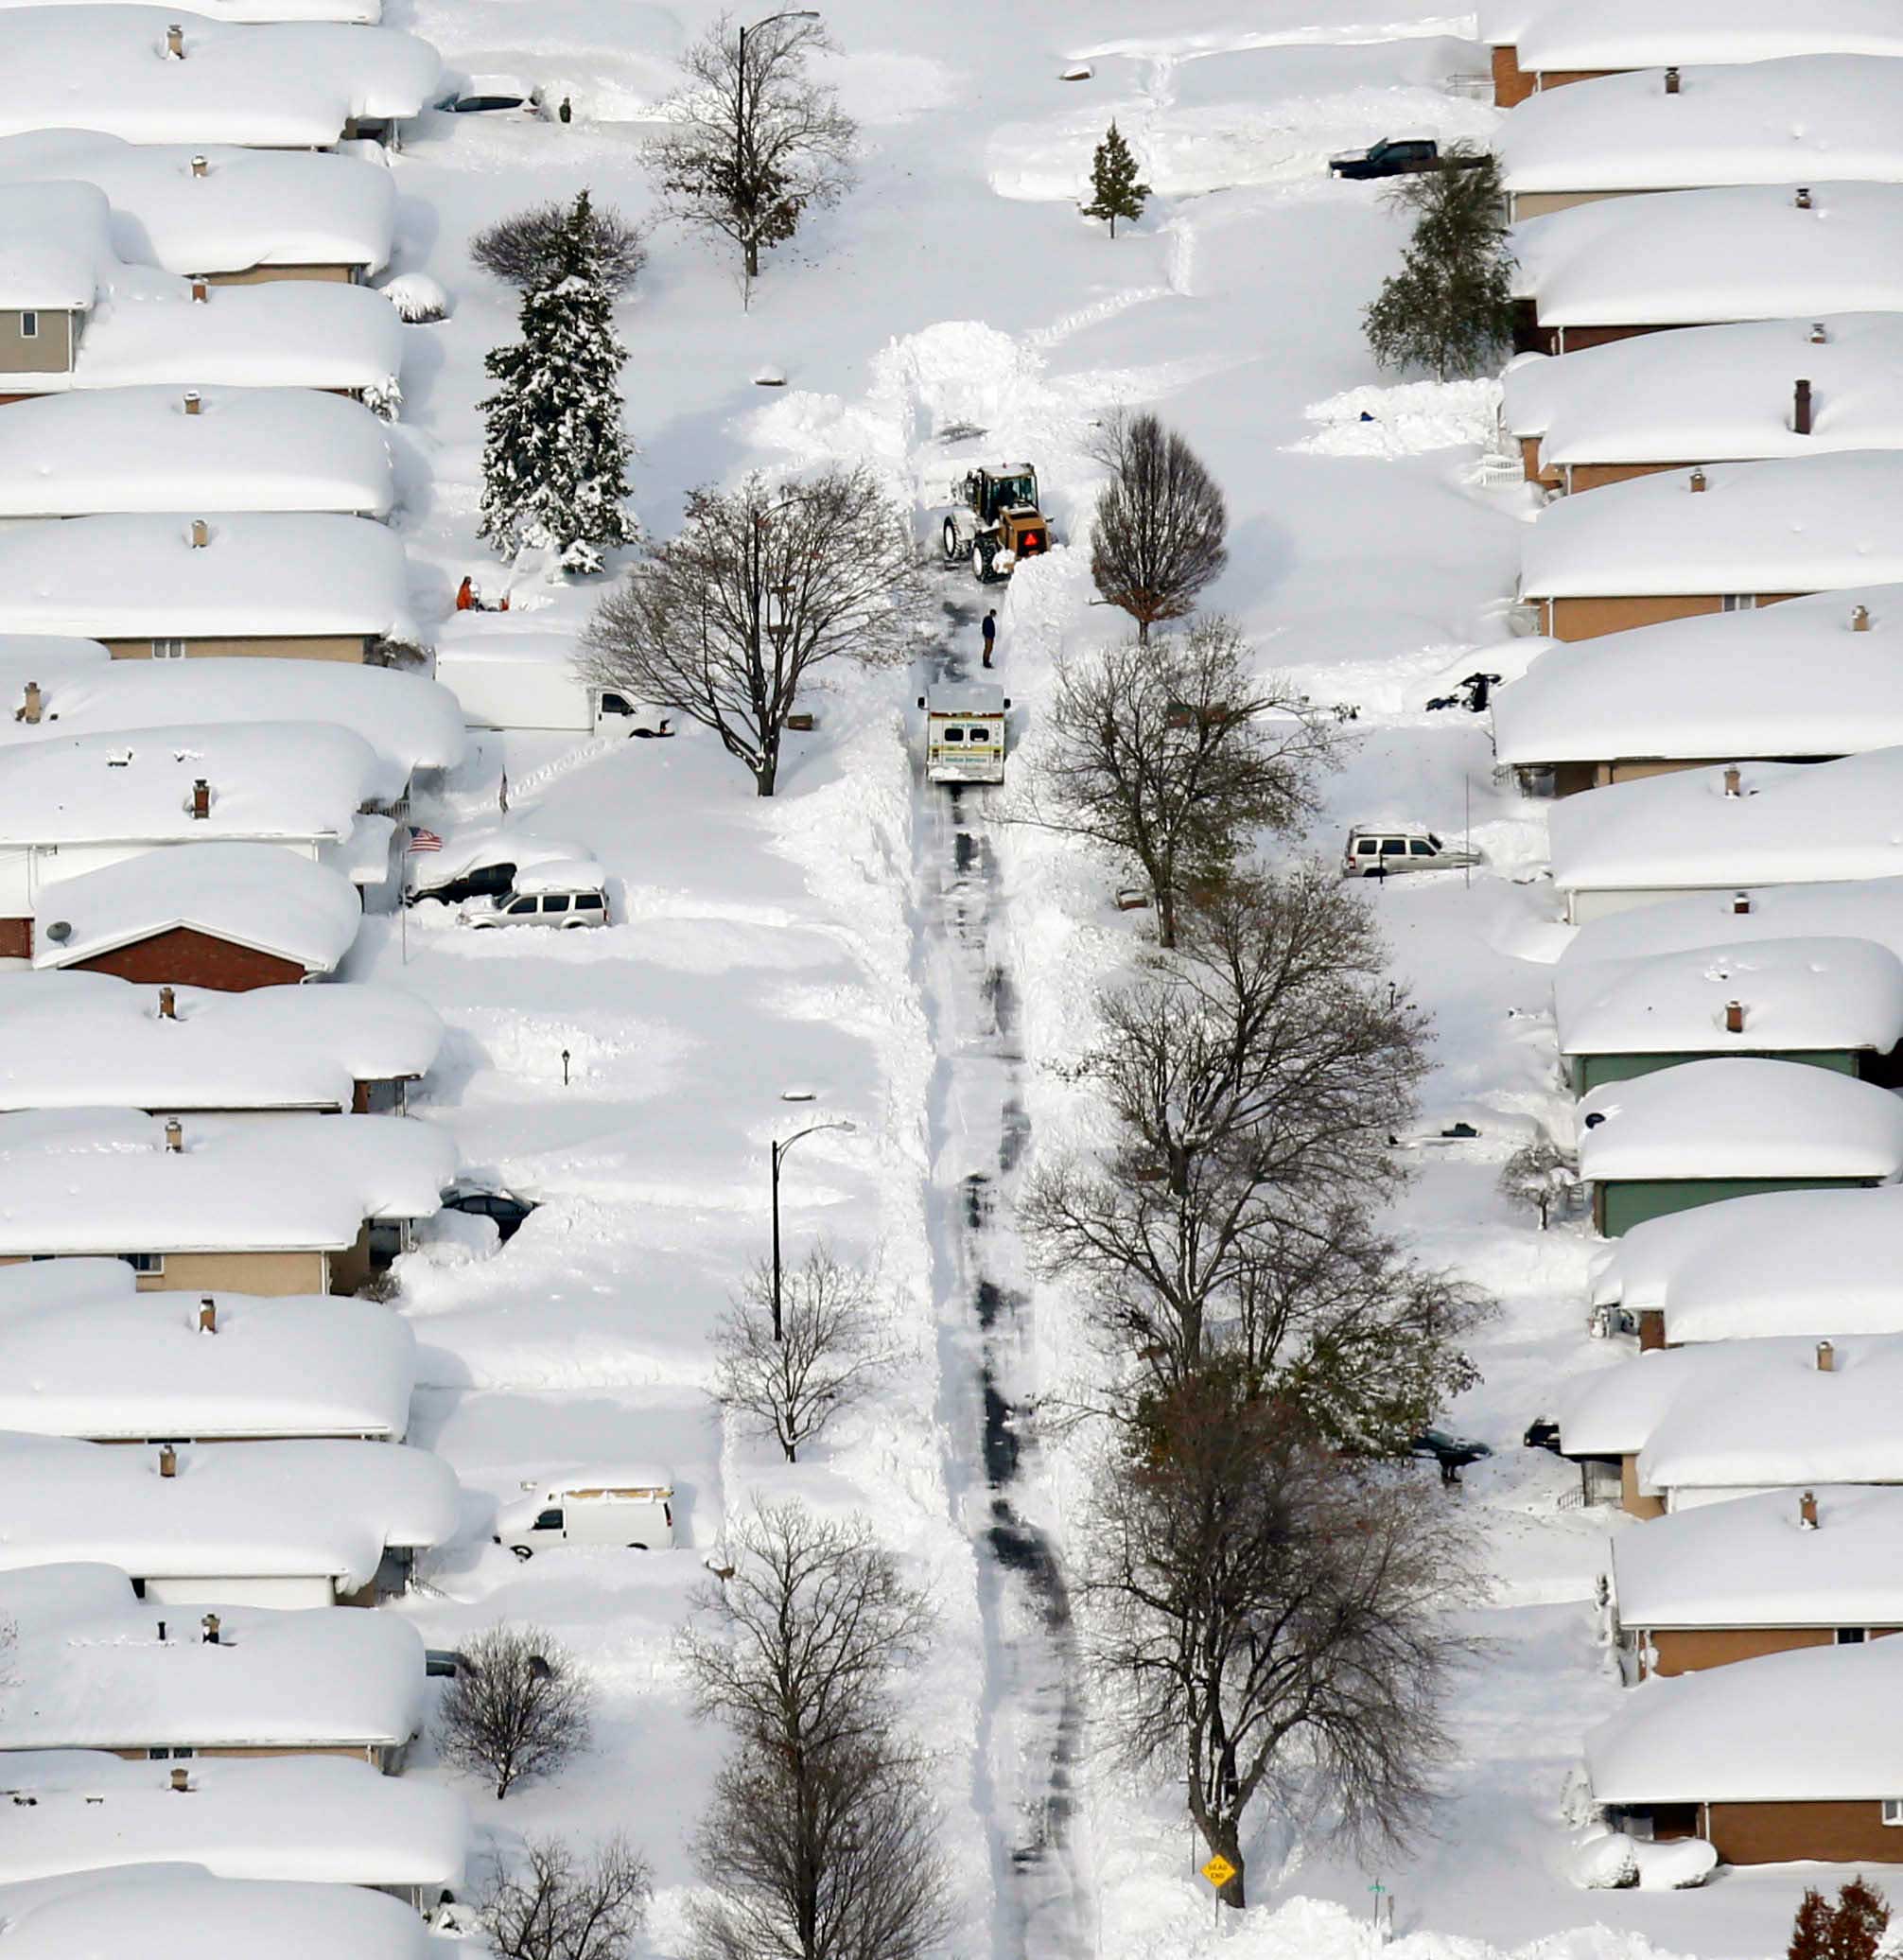 A bulldozer clears the way for an ambulance in a neighborhood in West Seneca, N.Y. on Nov. 19, 2014.